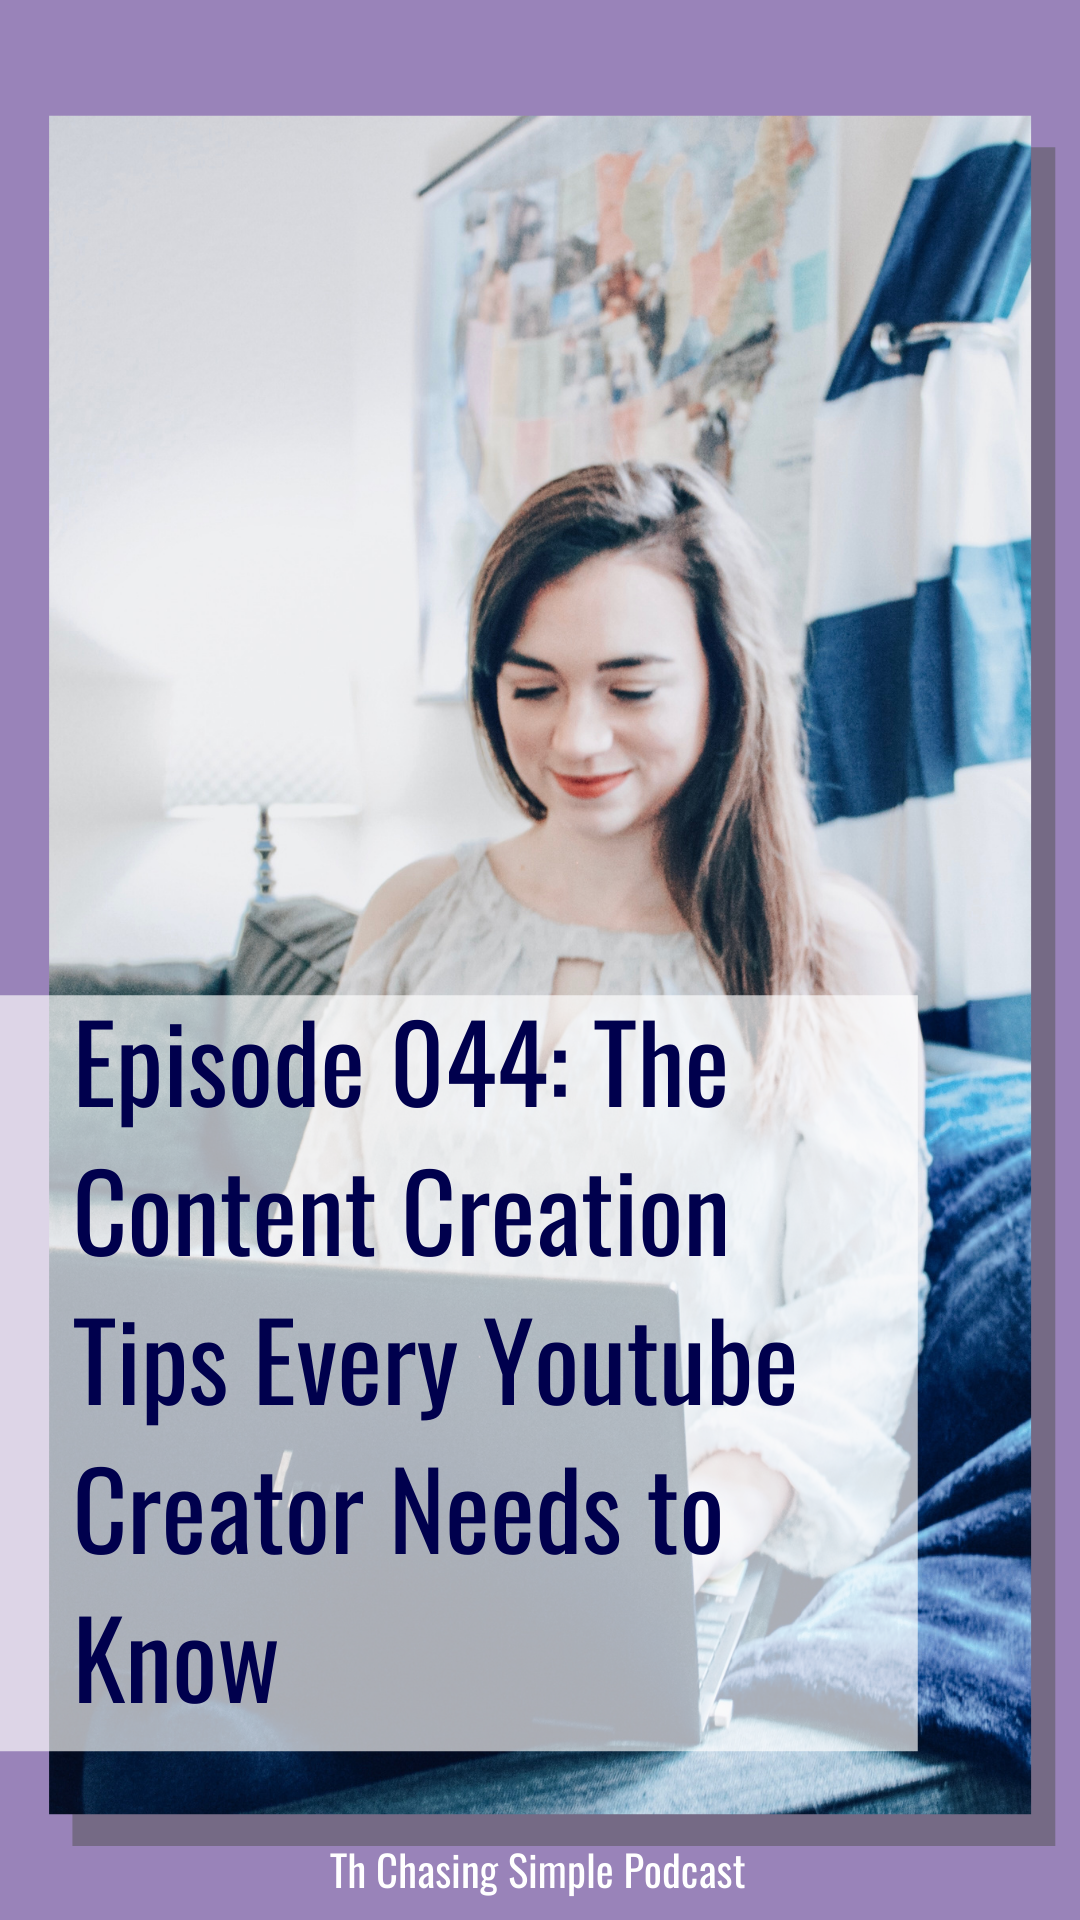 If you find yourself spending a large chunk of your working hours on Youtube content creation, this episode is for you.